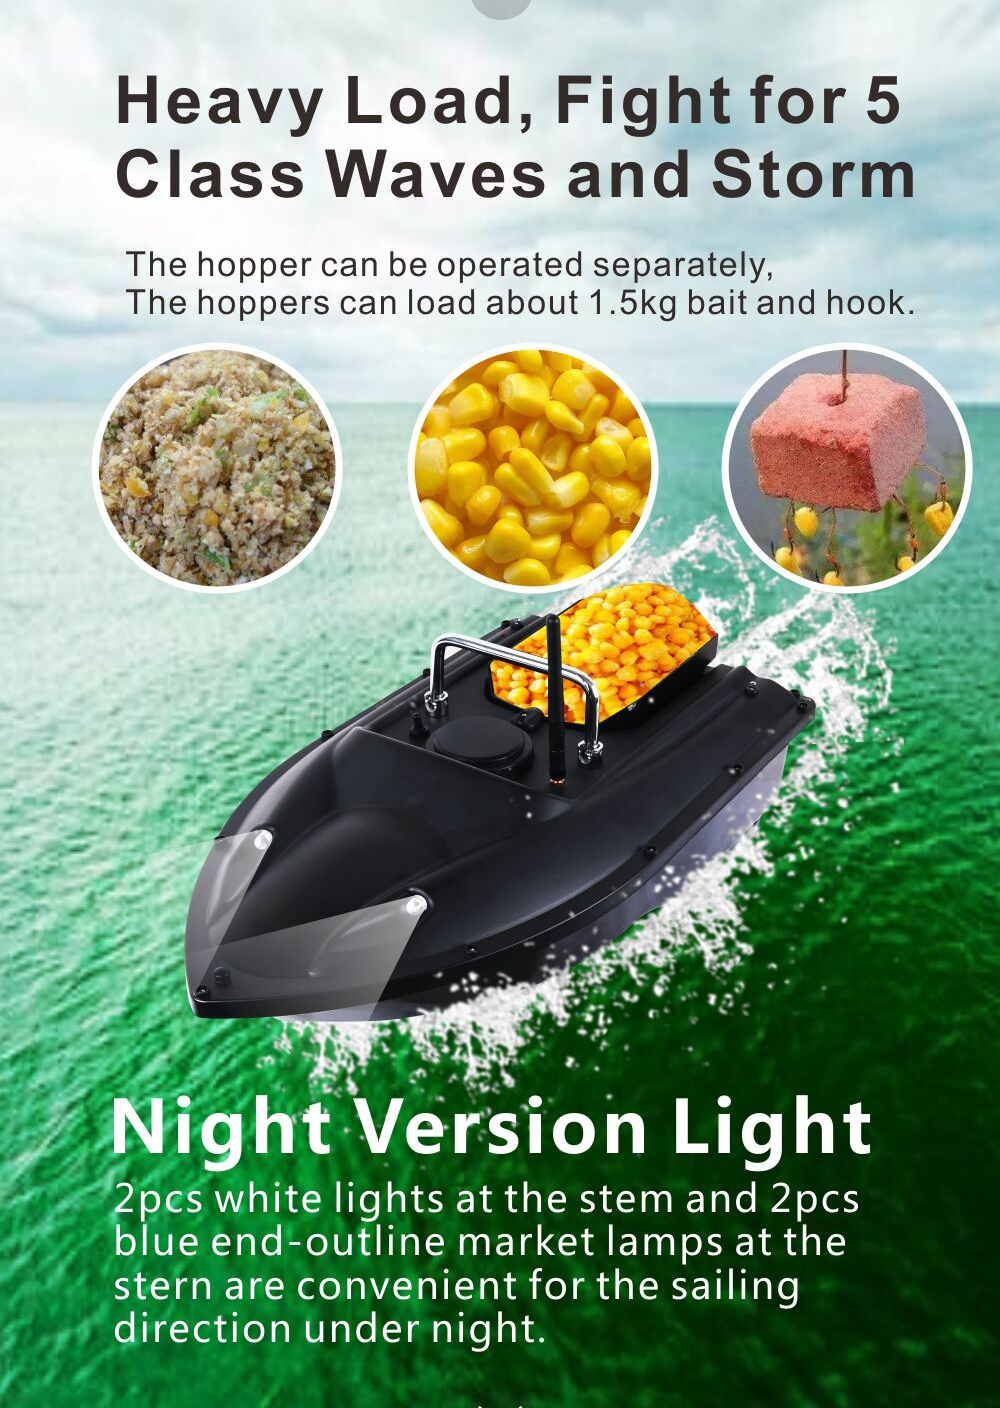 ZANLURE-400-500-Meters-Carp-Fishing-Feeder-Intelligent-Remote-Control-Fishing-Bait-Boat-RC-Outdoor-M-1572244-4